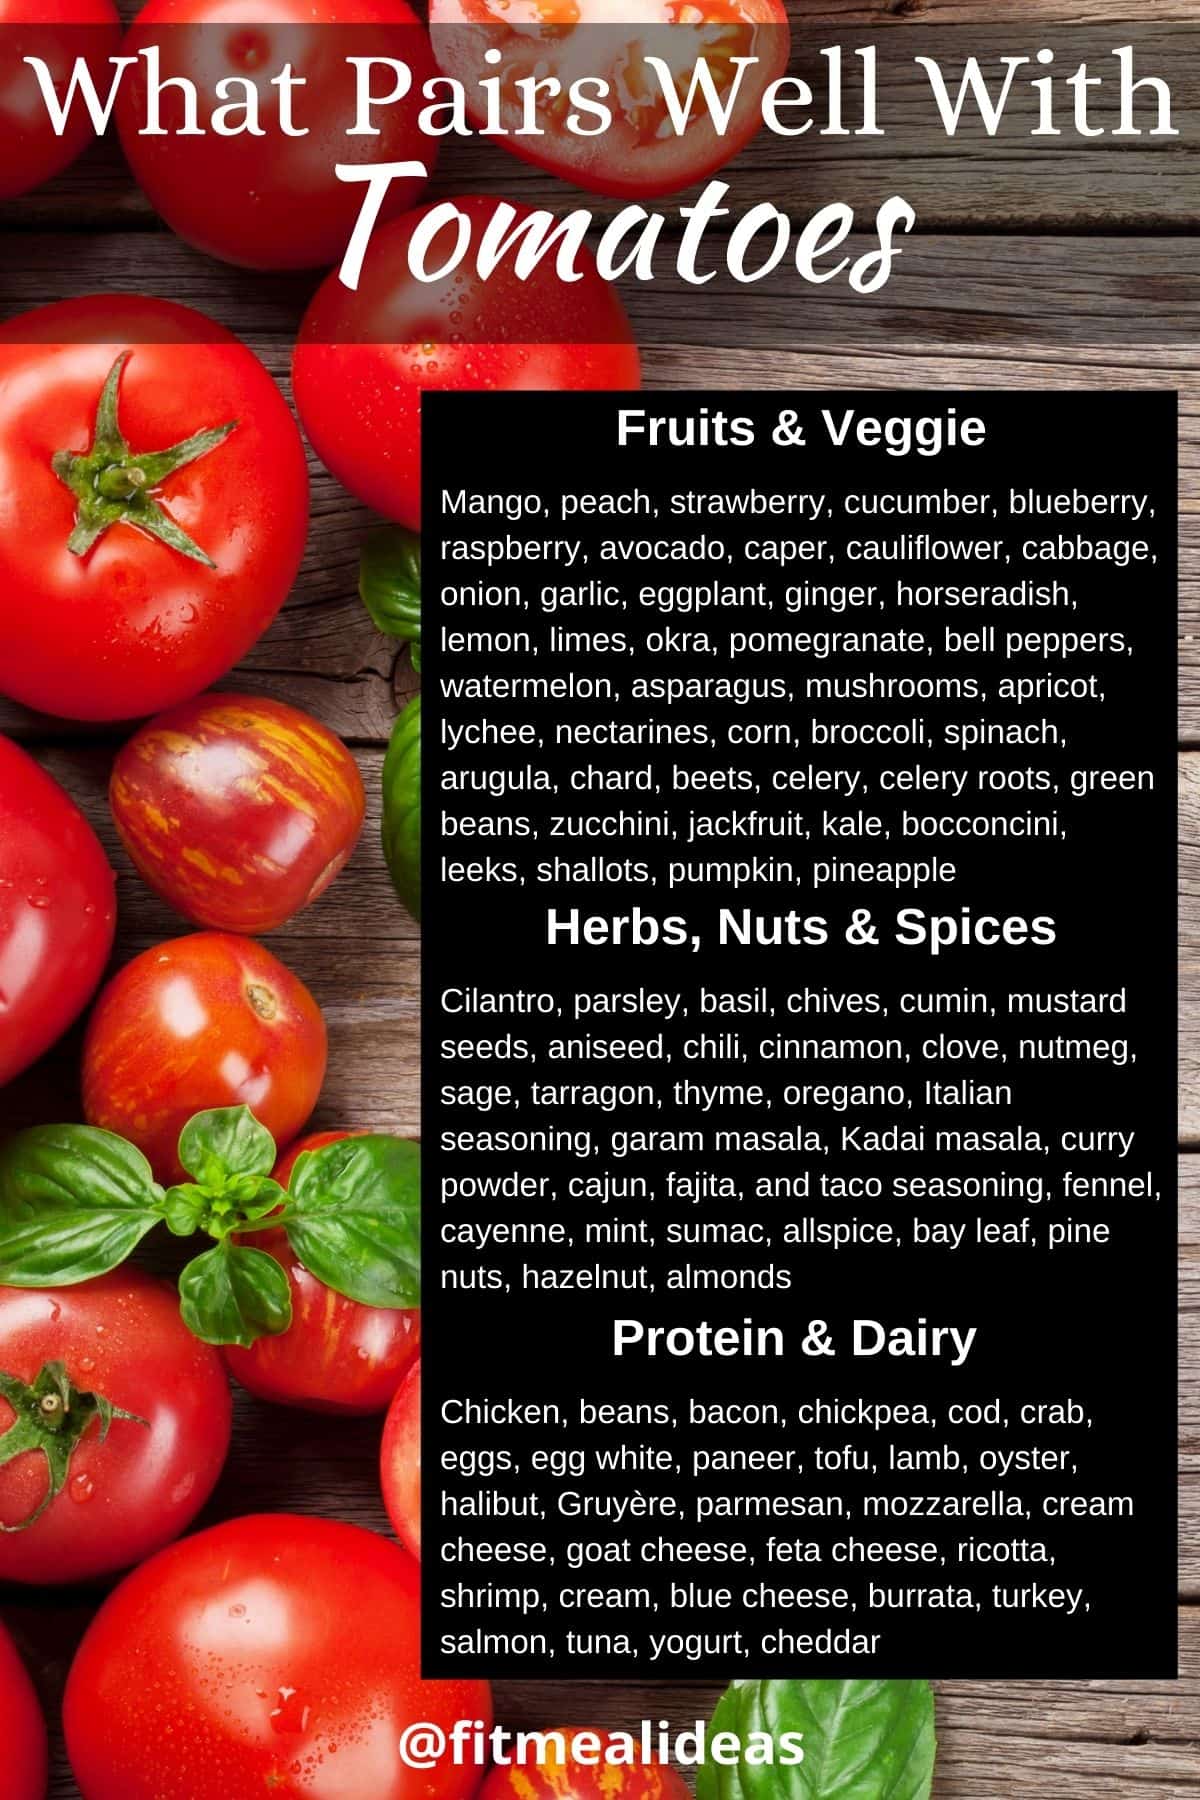 infographic for tomatoes and flavors that go well with them.